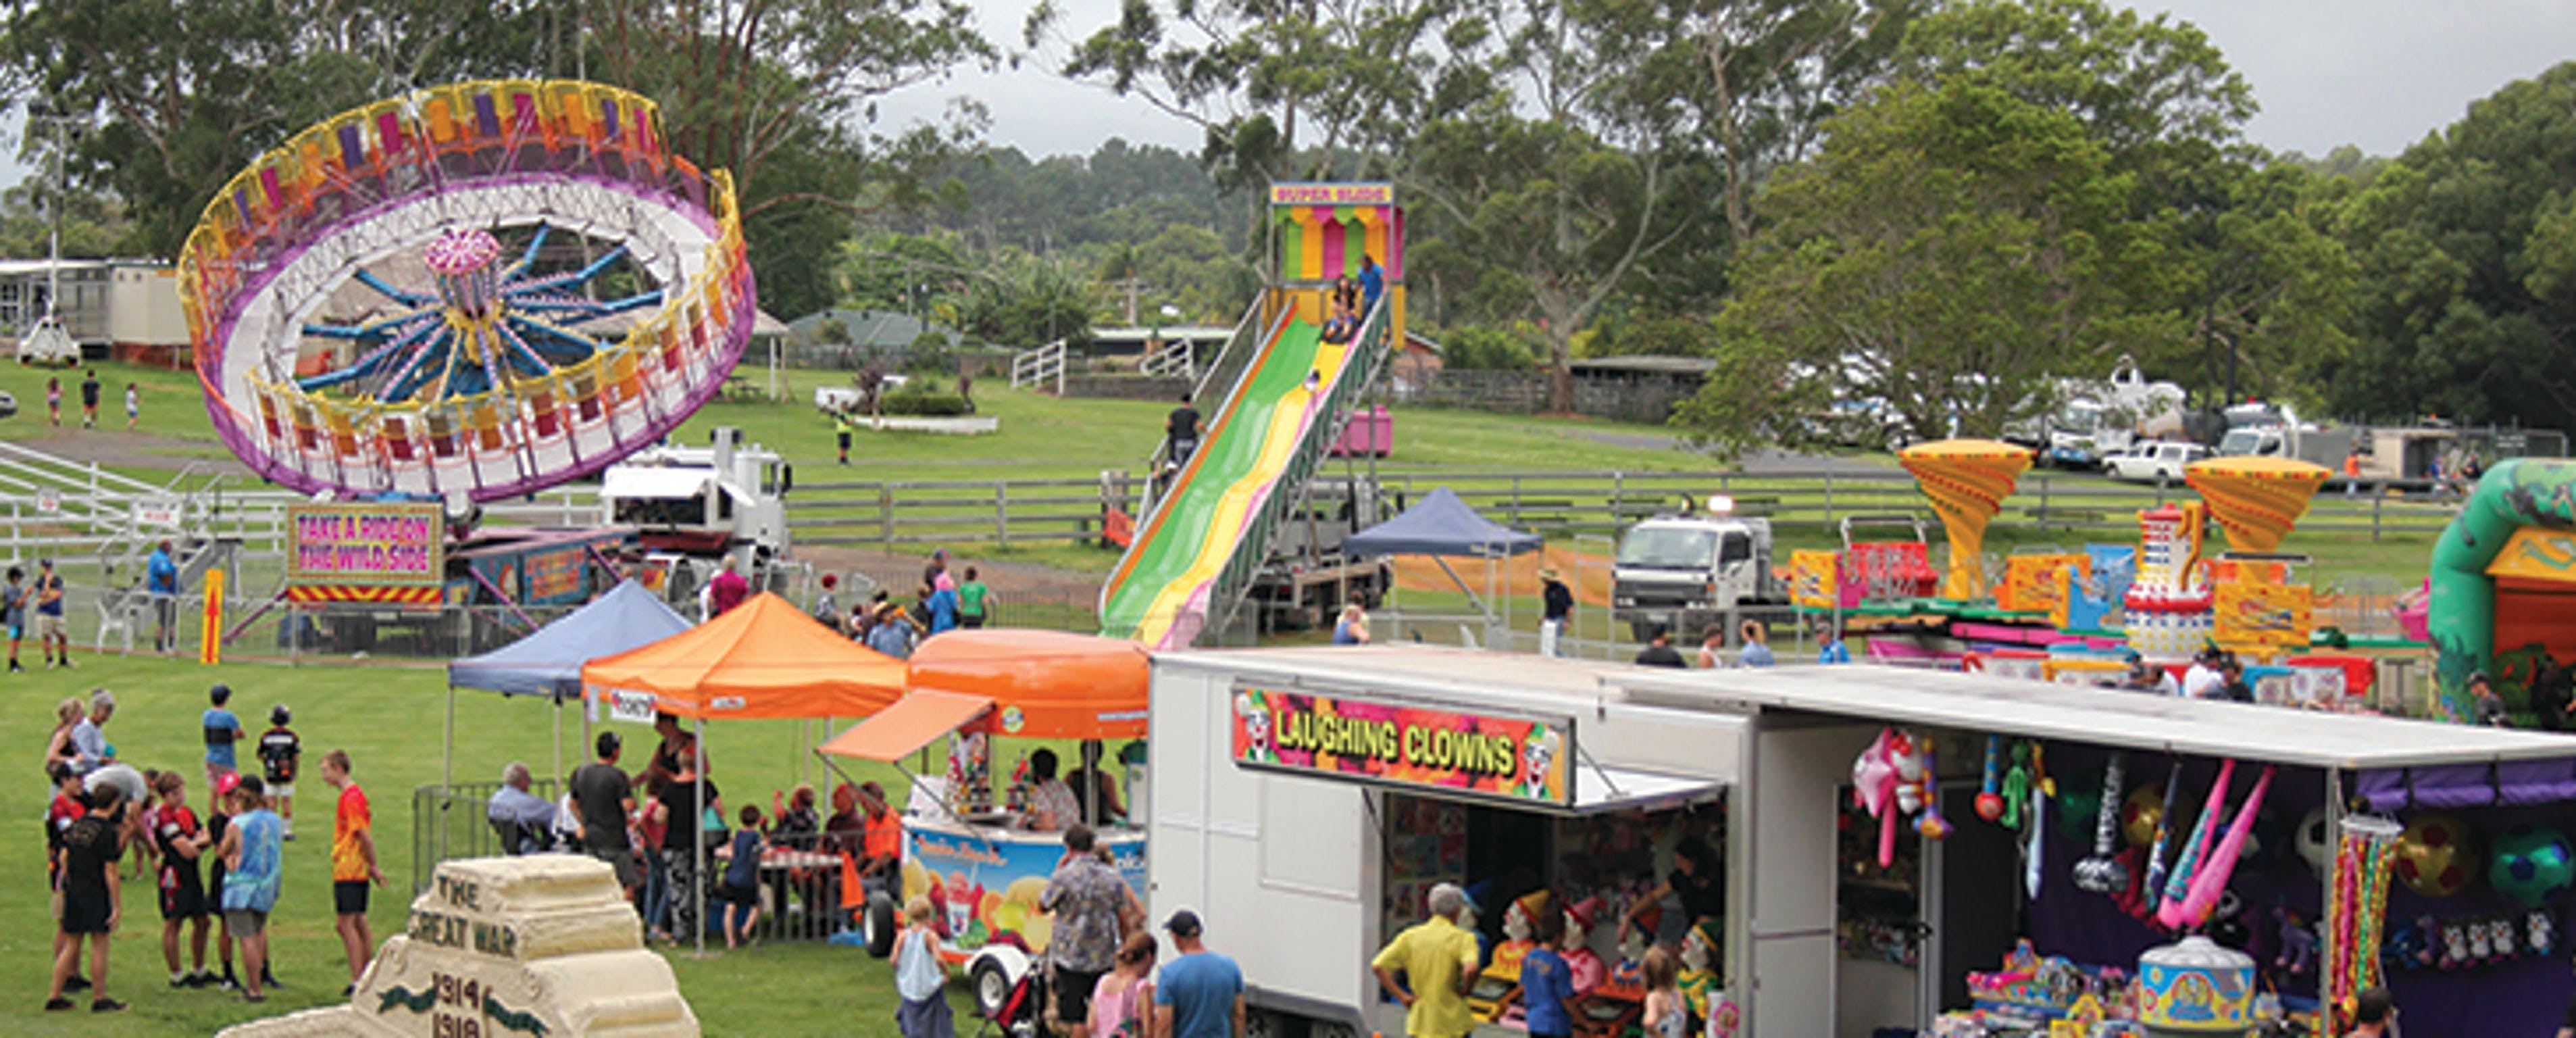 Alstonville Agricultural Society Show - Carnarvon Accommodation